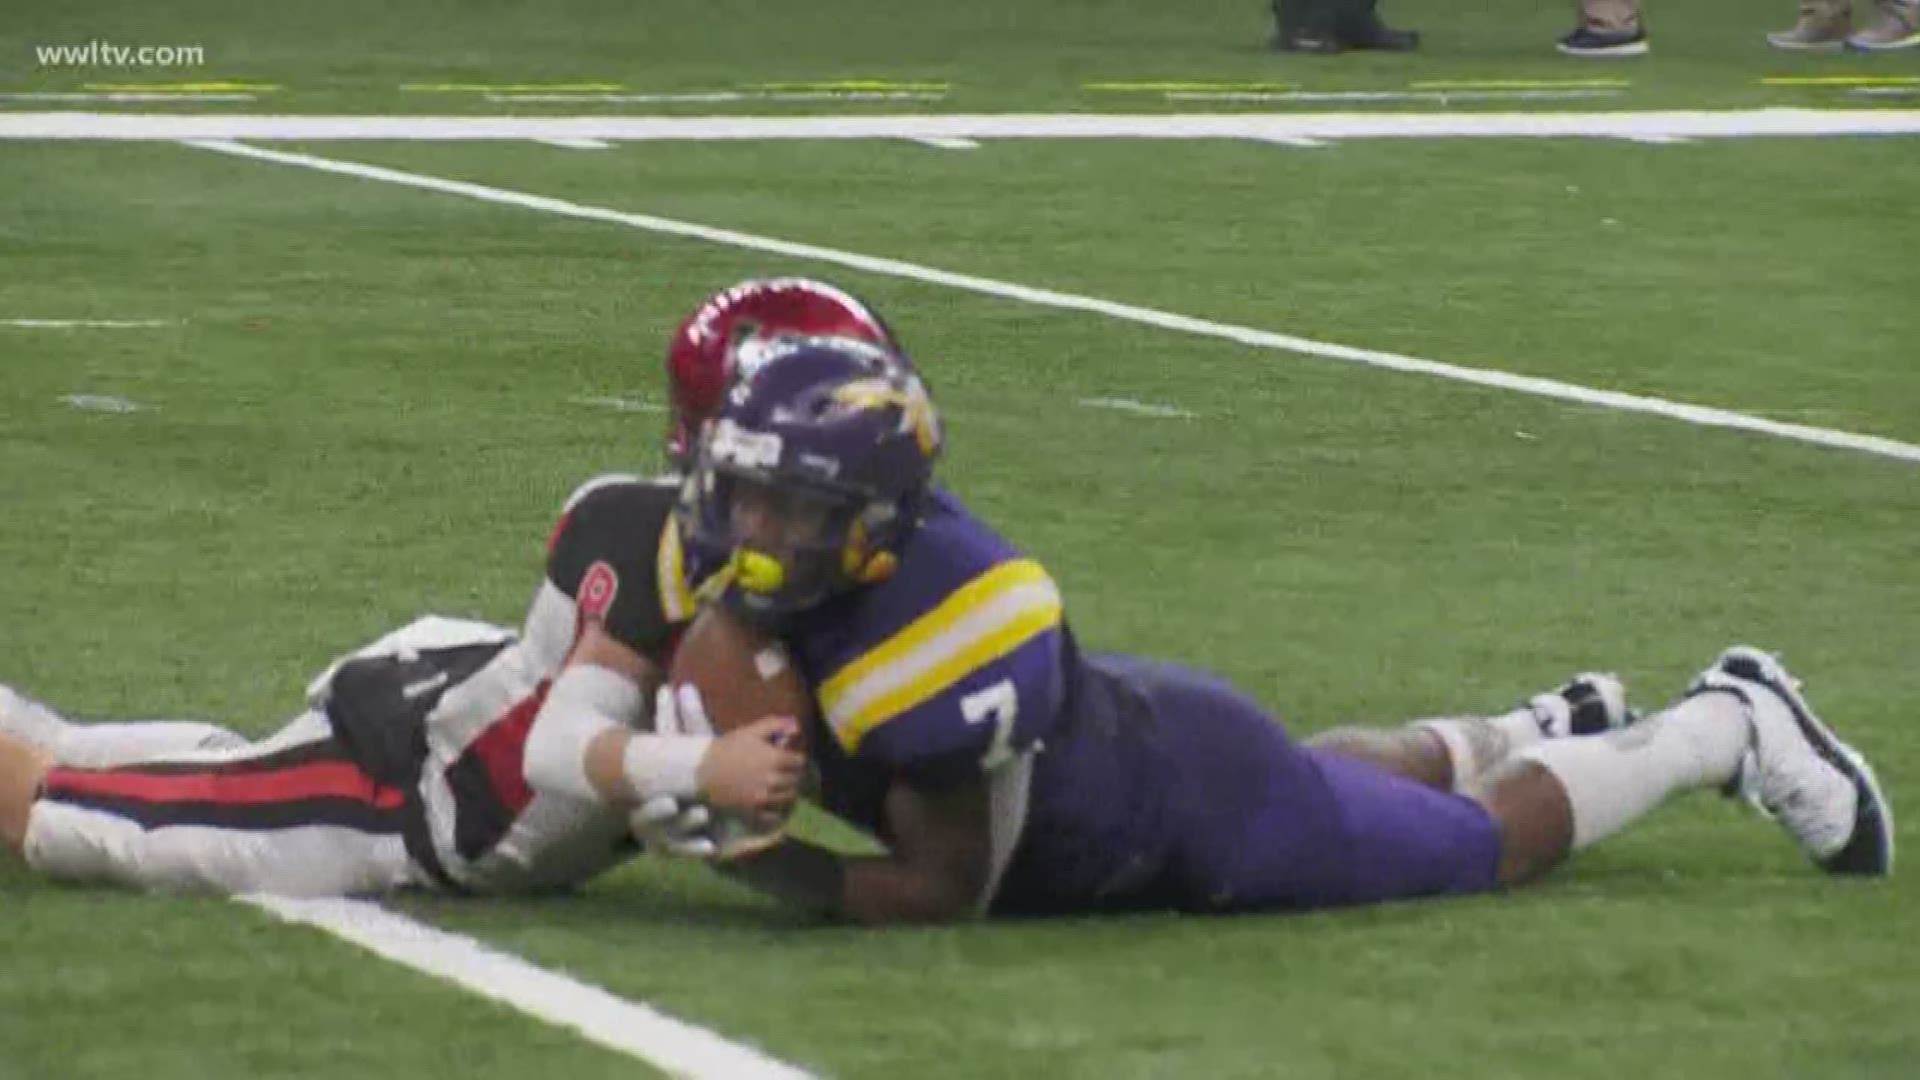 Amite won its first state title since 2004 with an impressive win over Welsh in the state finals.